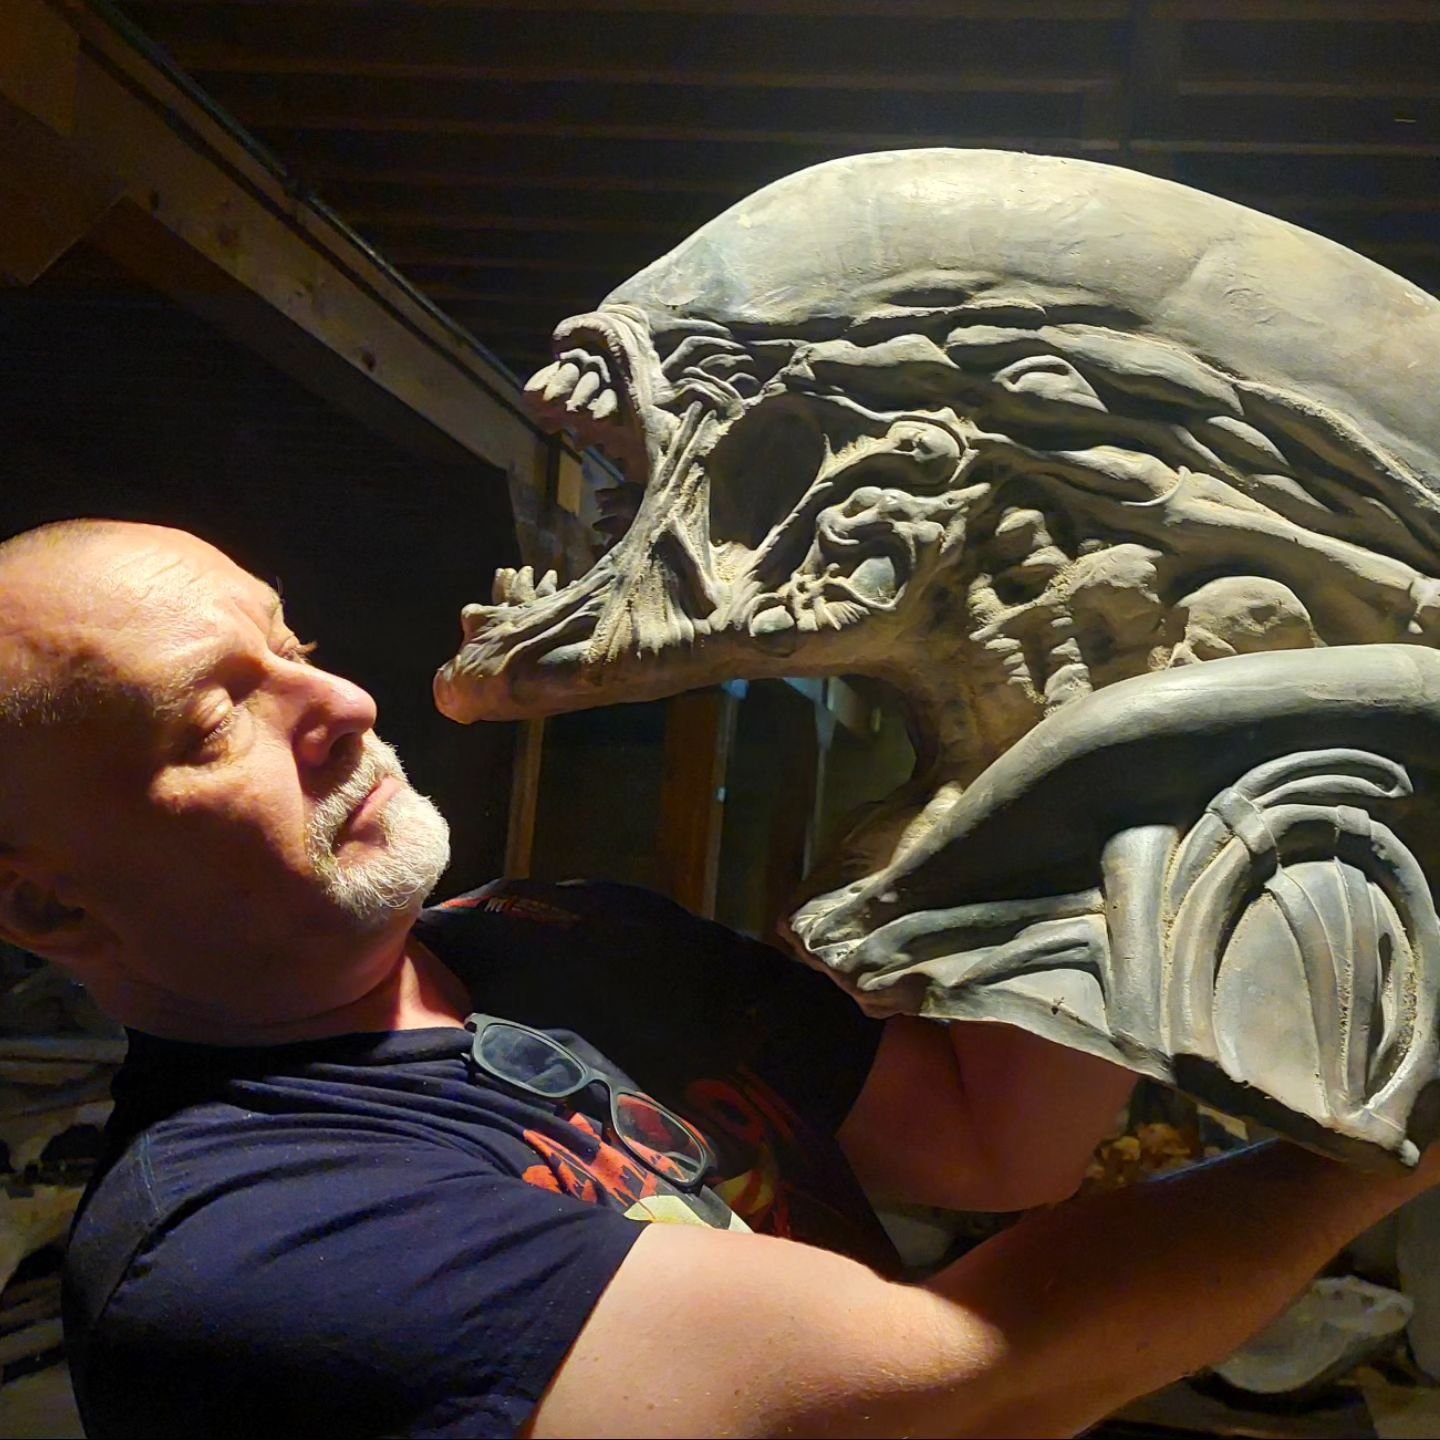 Our minions were given The Distortions Unlimited tour @distortionsunlimited by one of our sculptors, Anders Lerche. @anders_lerche Anders has flown in all the way from Denmark to lend his talented hands for some Distortions monster magic. 

If these 